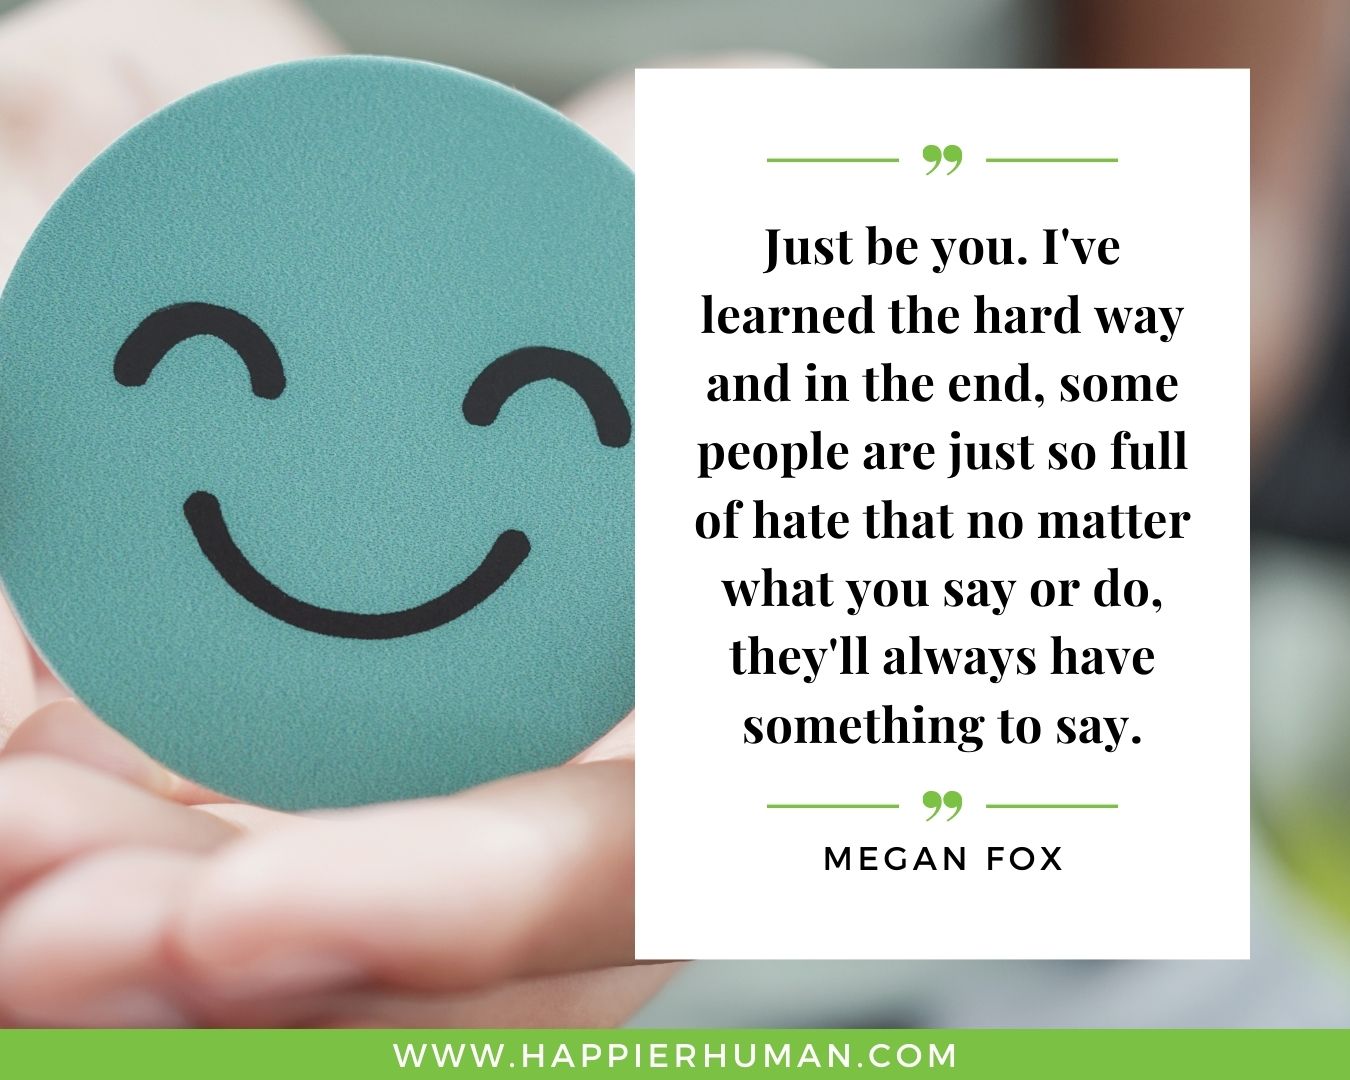 Haters Quotes - “Just be you. I've learned the hard way and in the end, some people are just so full of hate that no matter what you say or do, they'll always have something to say.” - Megan Fox